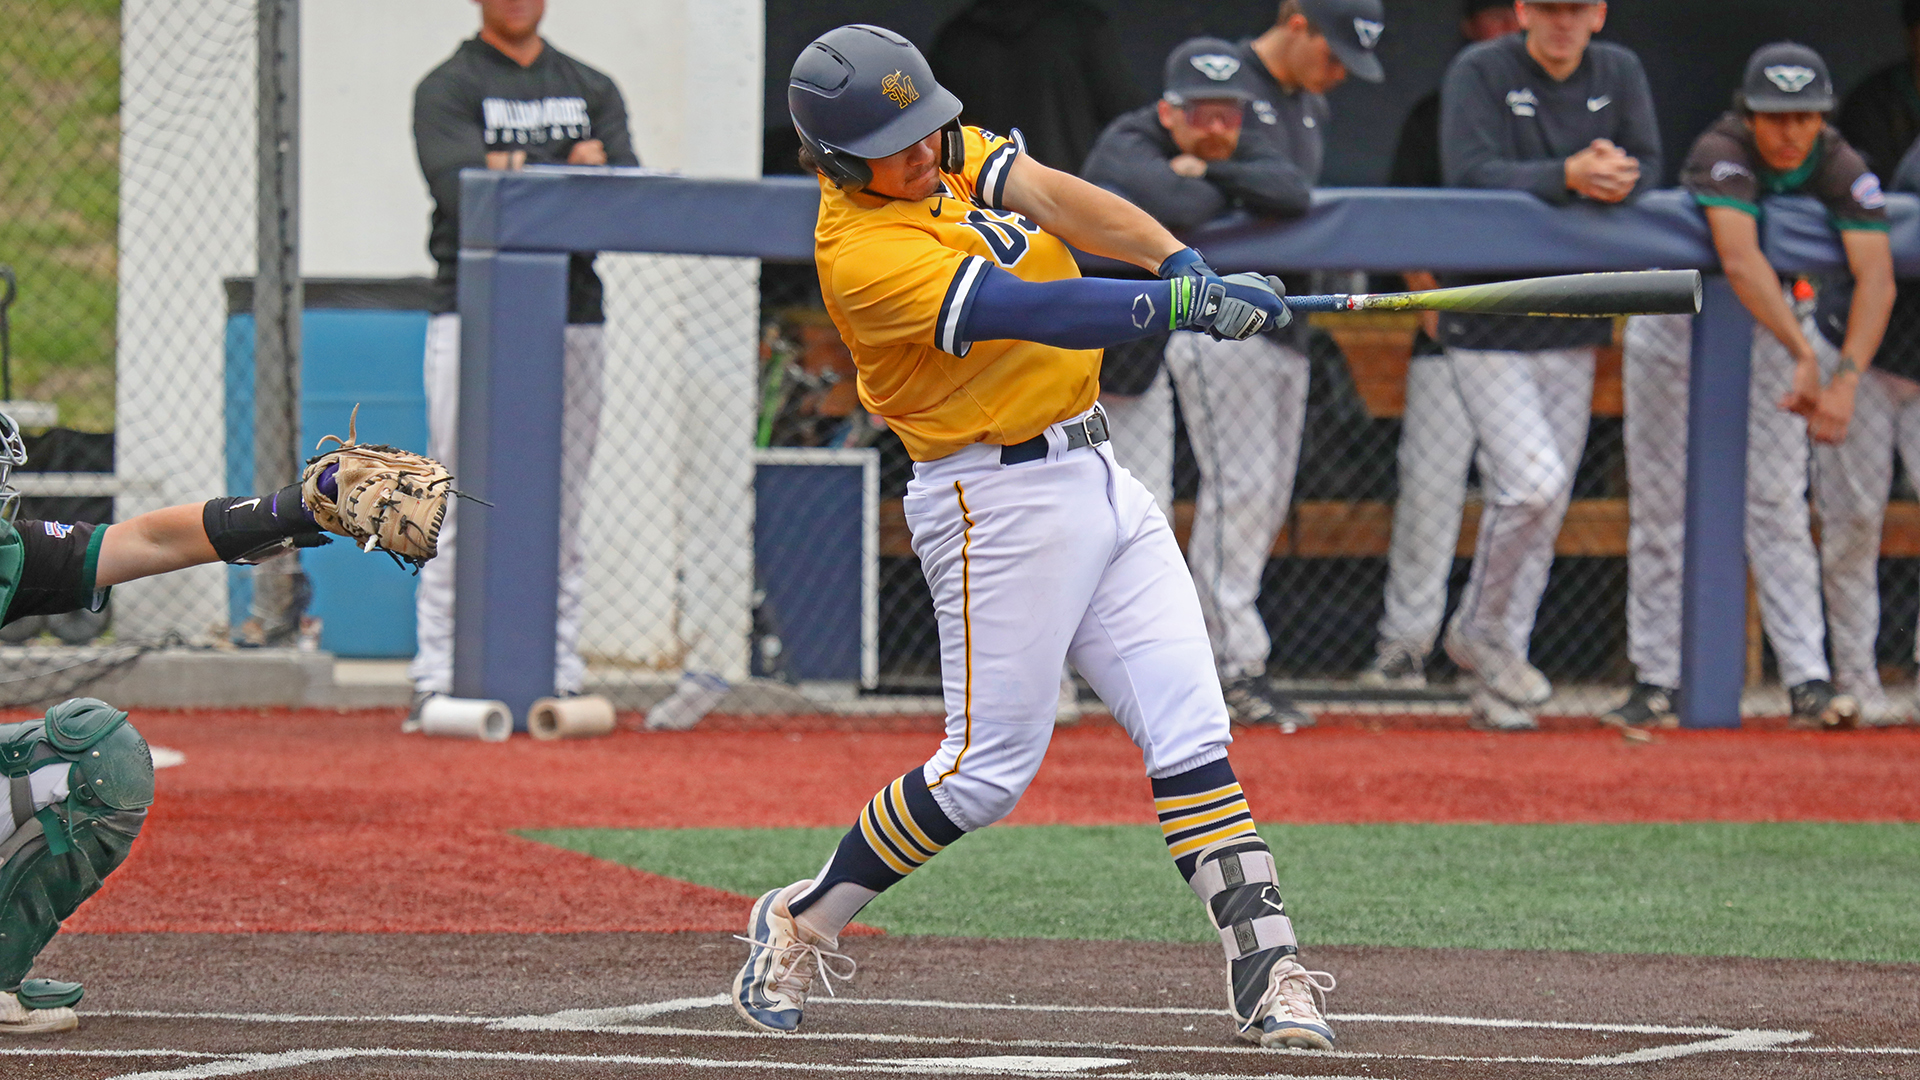 Baseball Splits With Sterling for Series Win